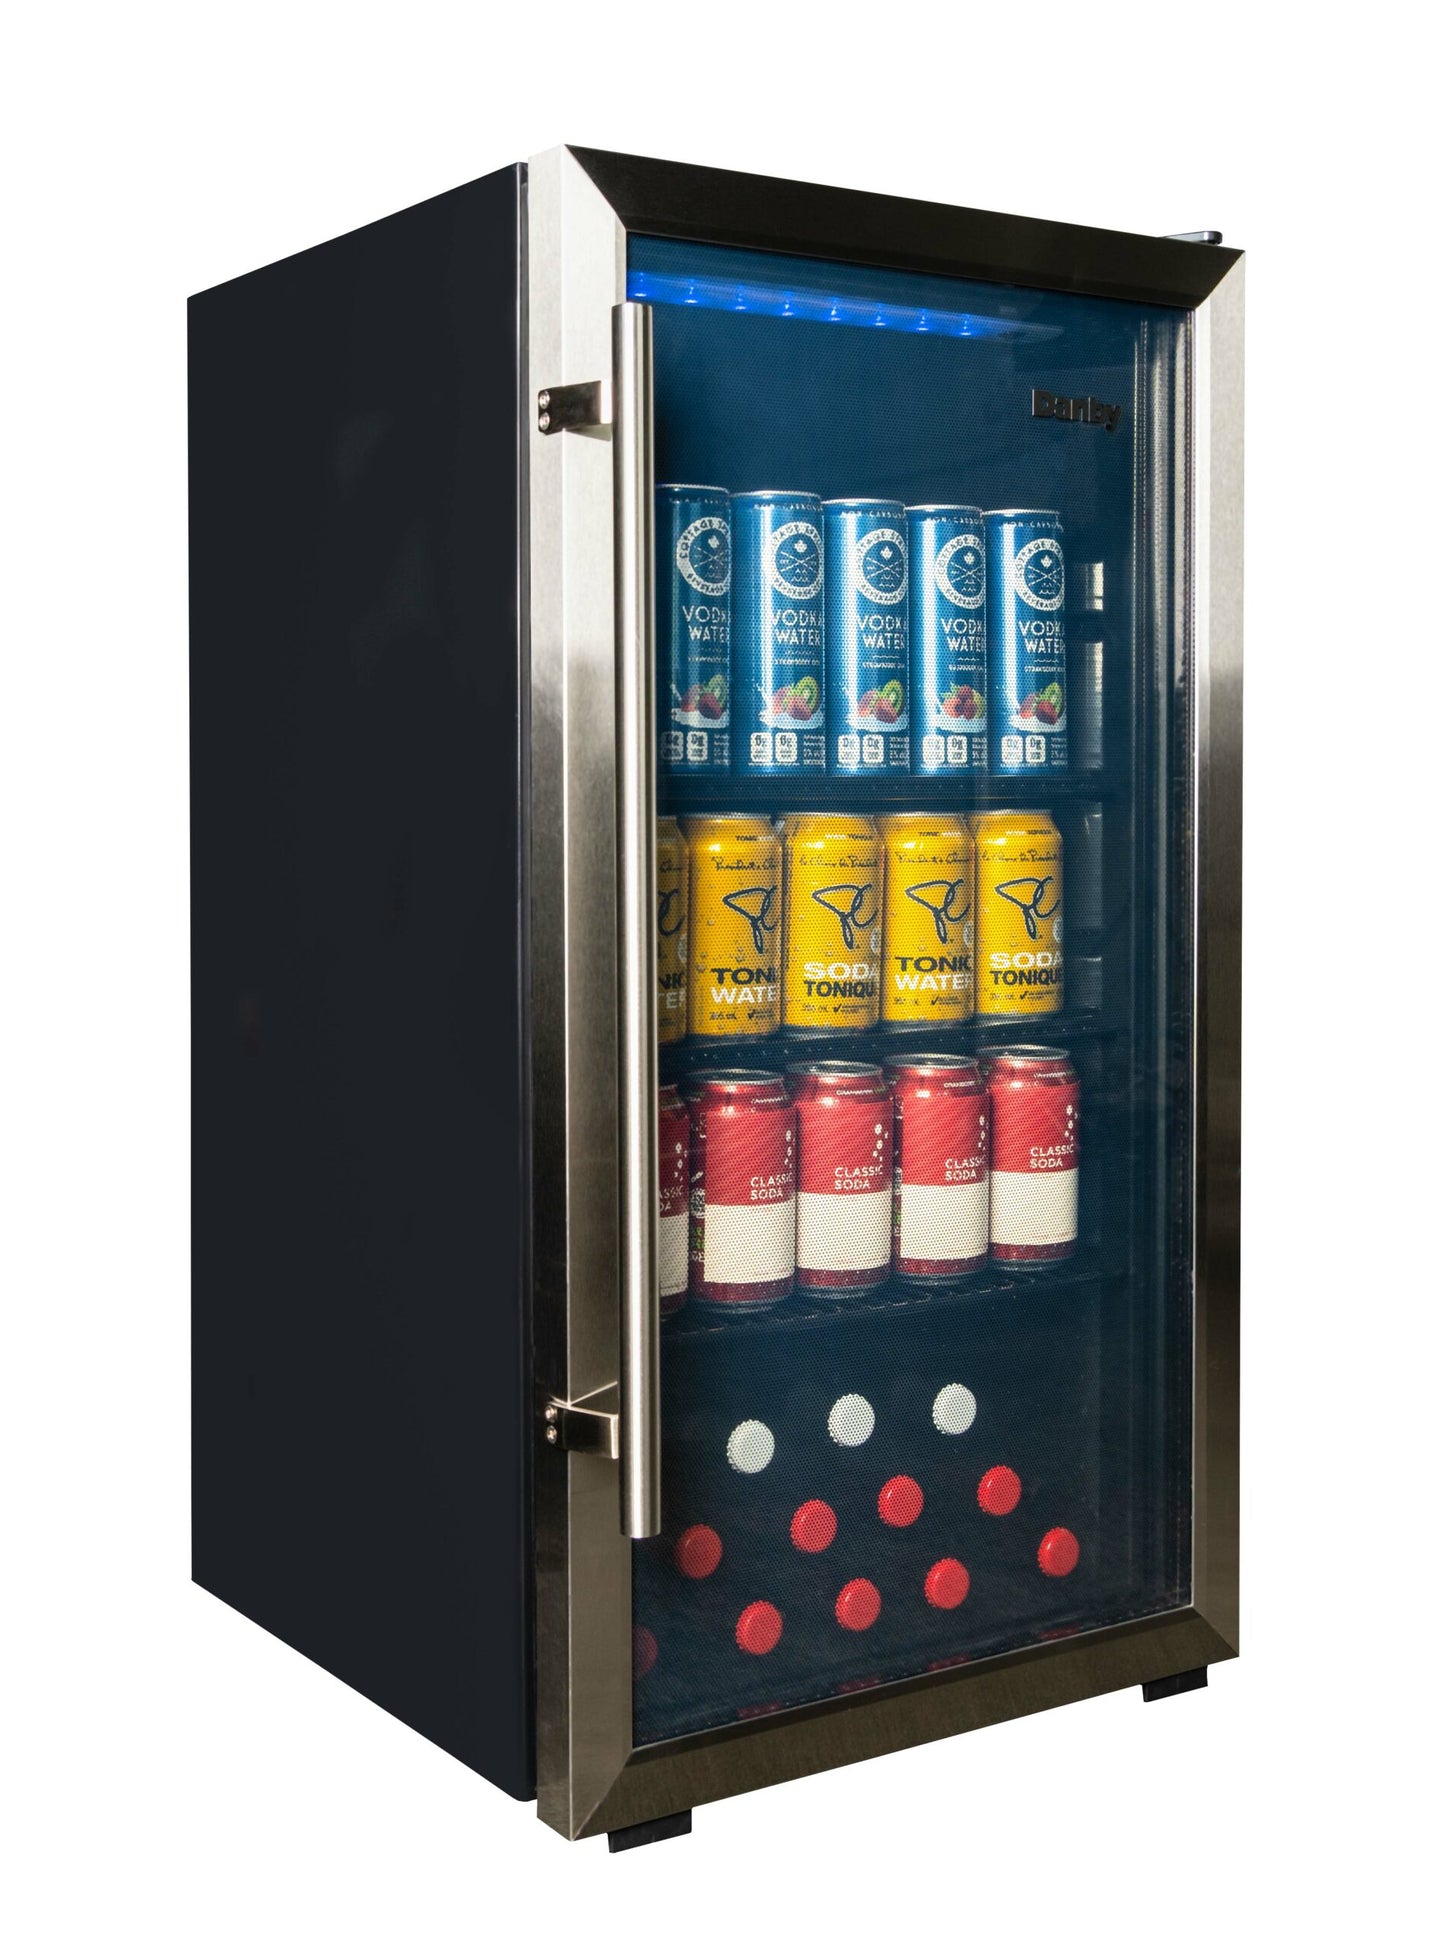 Danby 3.1 cu. ft. Free-Standing Beverage Center in Stainless Steel - DBC117A2BSSDD-6